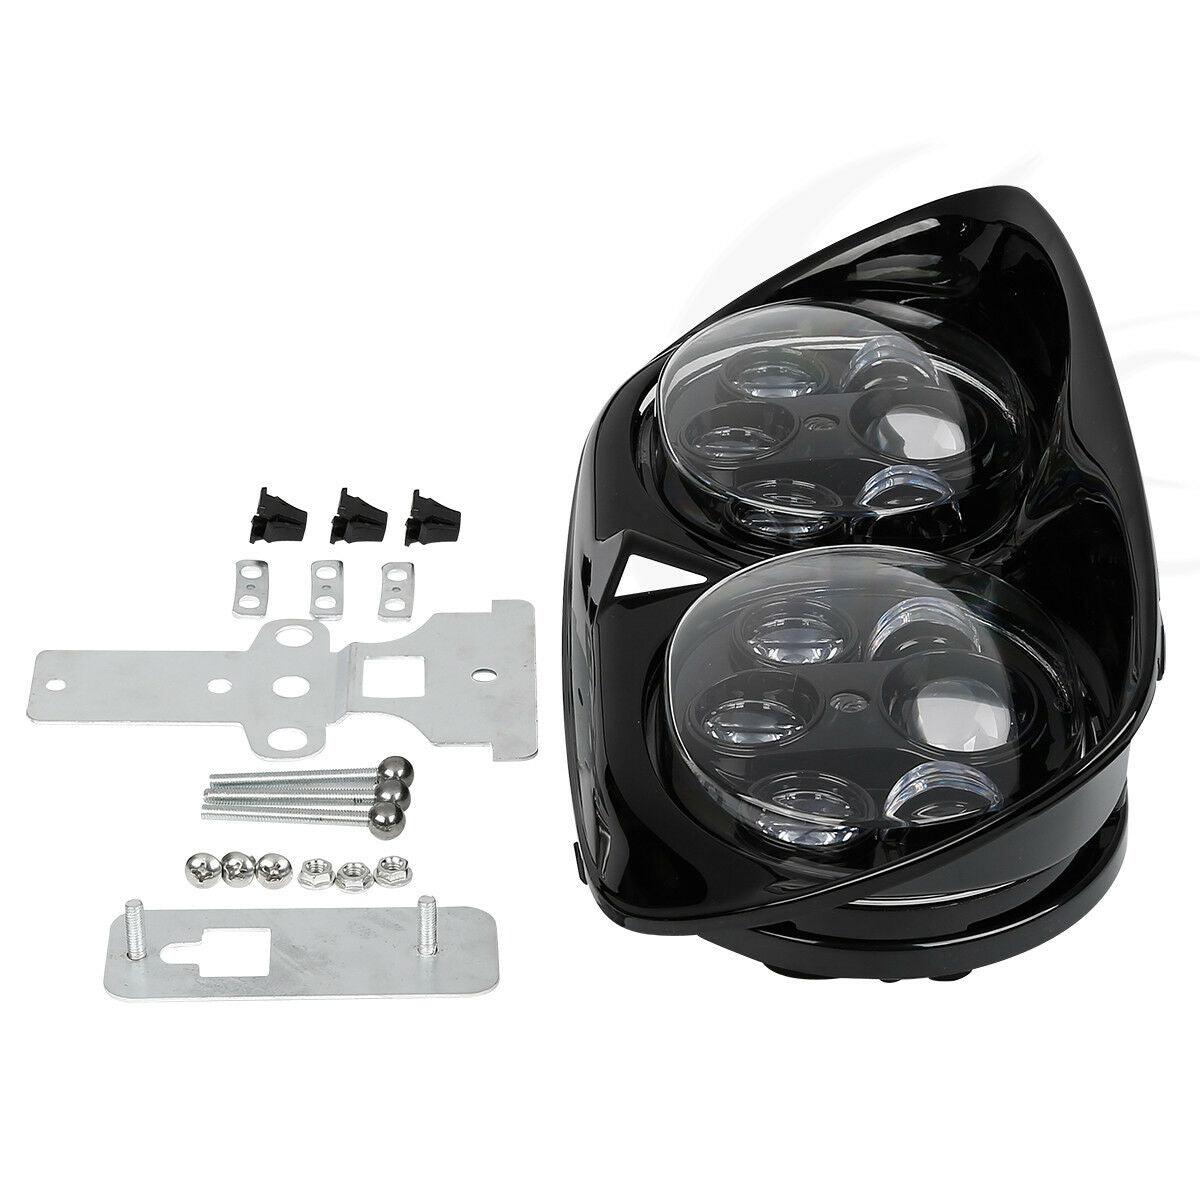 5.75" Dual LED Headlight Projector Lamp Fit For Harley Touring Road Glide 98-13 - Moto Life Products